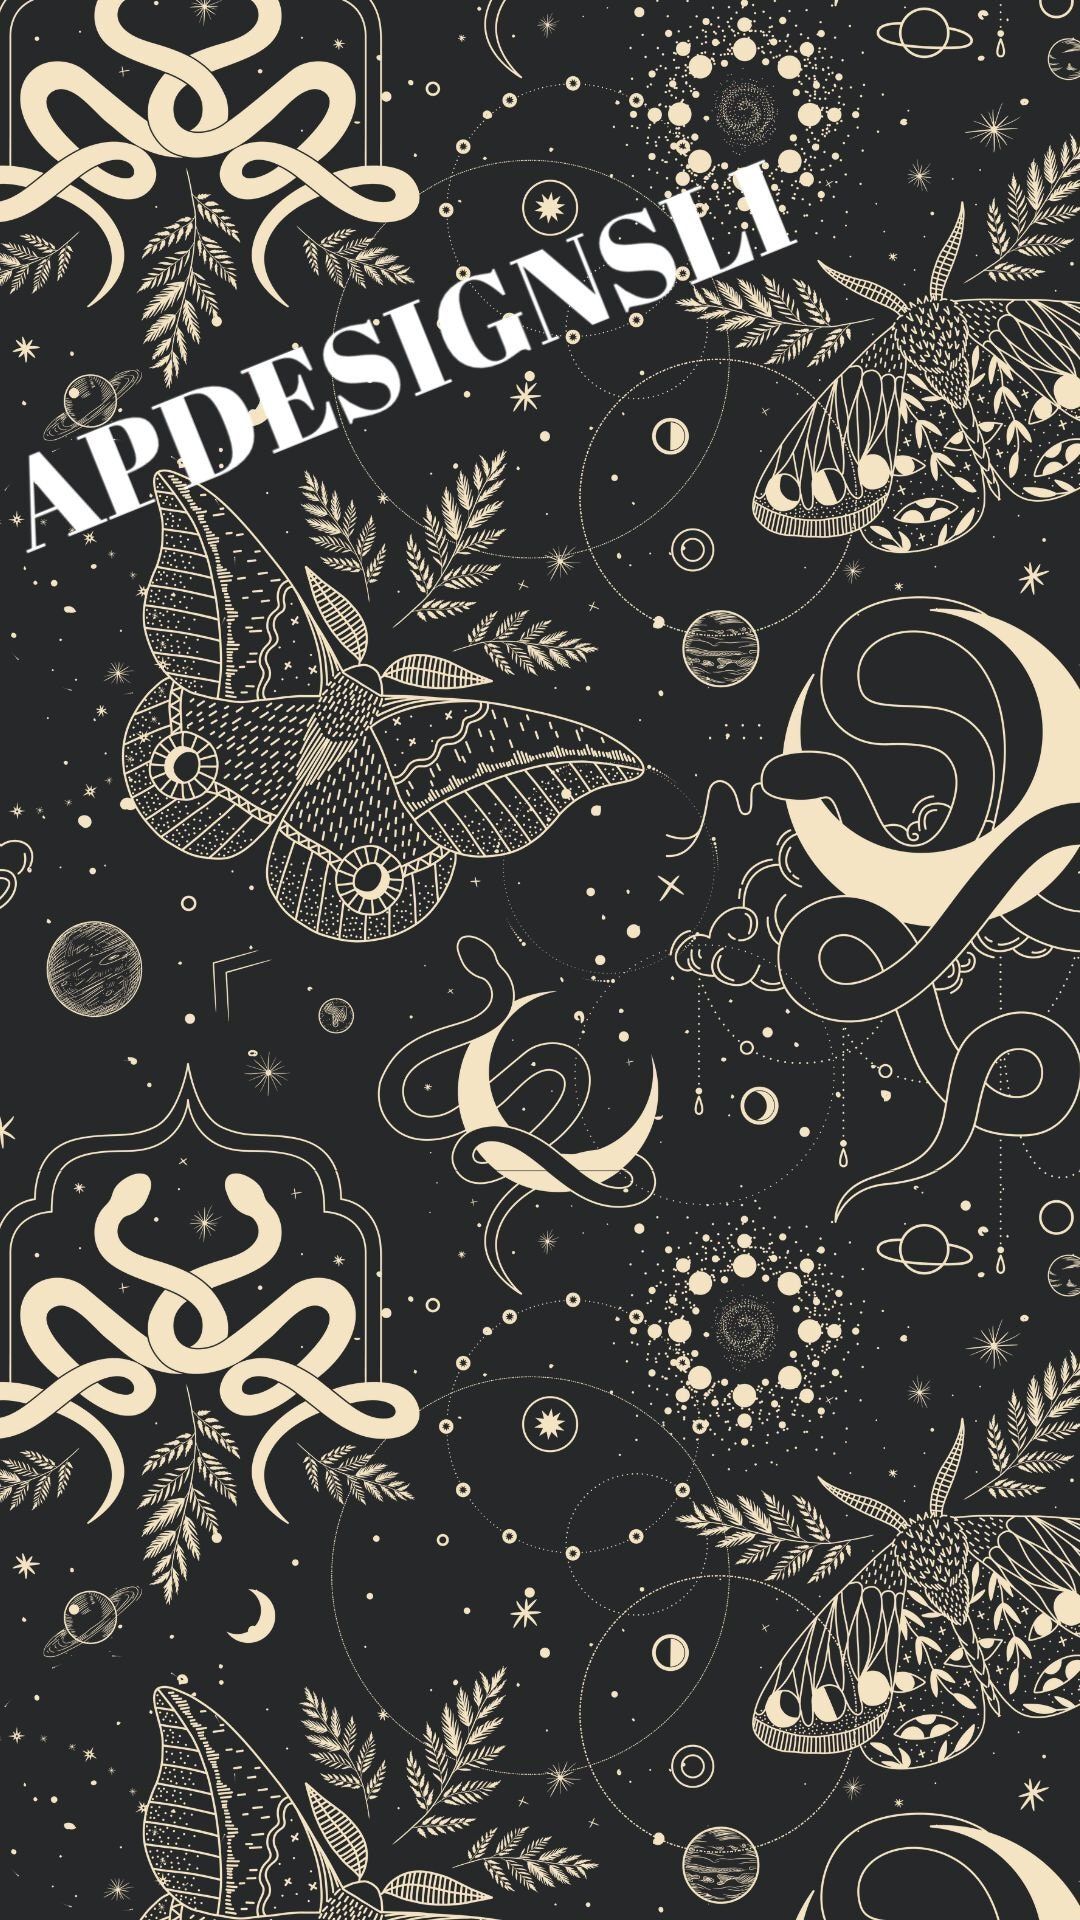 A black wallpaper with white designs of moths, stars, and moons. - Witch